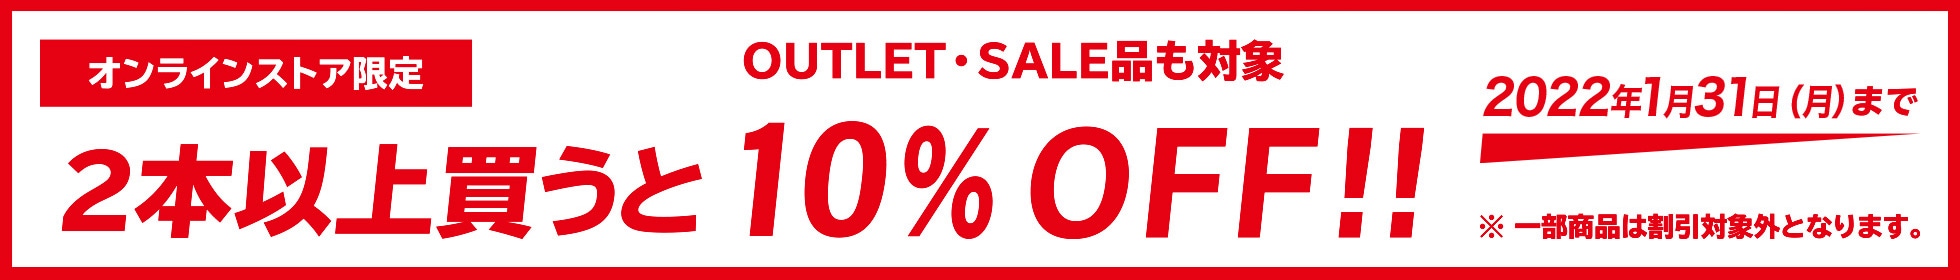 SALE・OUTLET品も対象 オンラインストア限定 2本以上買うと10%OFF!!